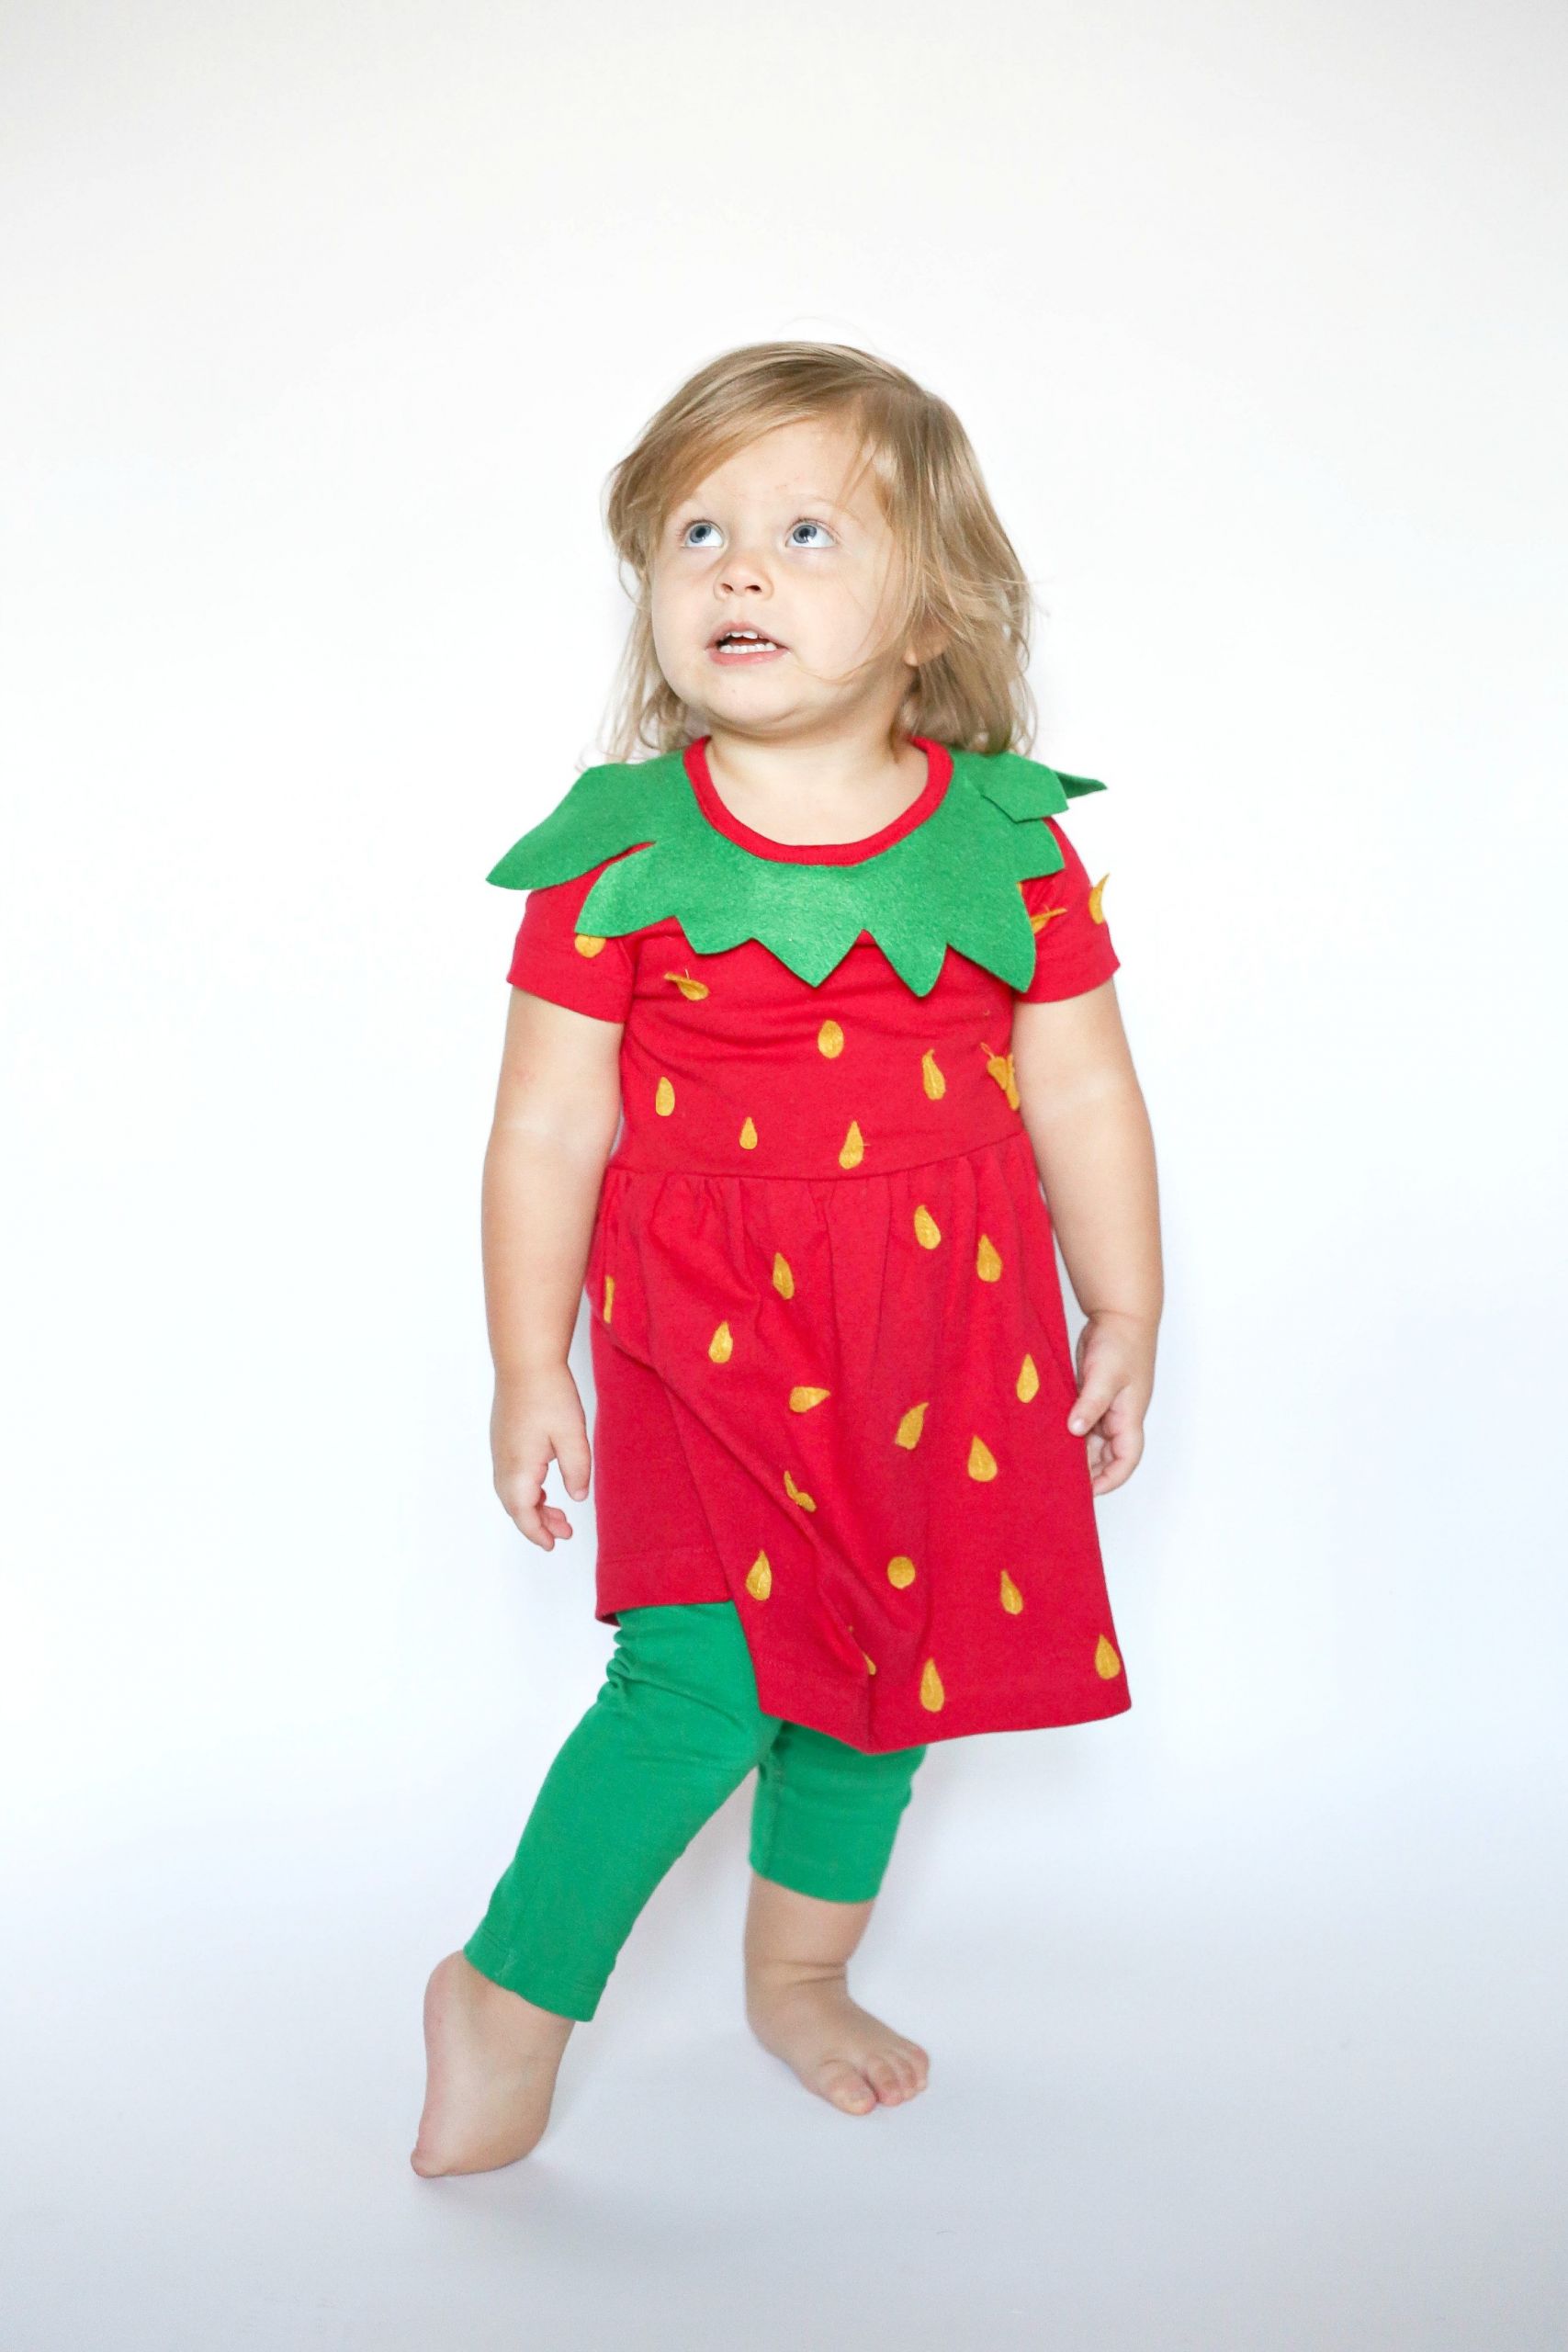 Strawberry Costume DIY
 Group Fruit Costume for Kids TaylorMade